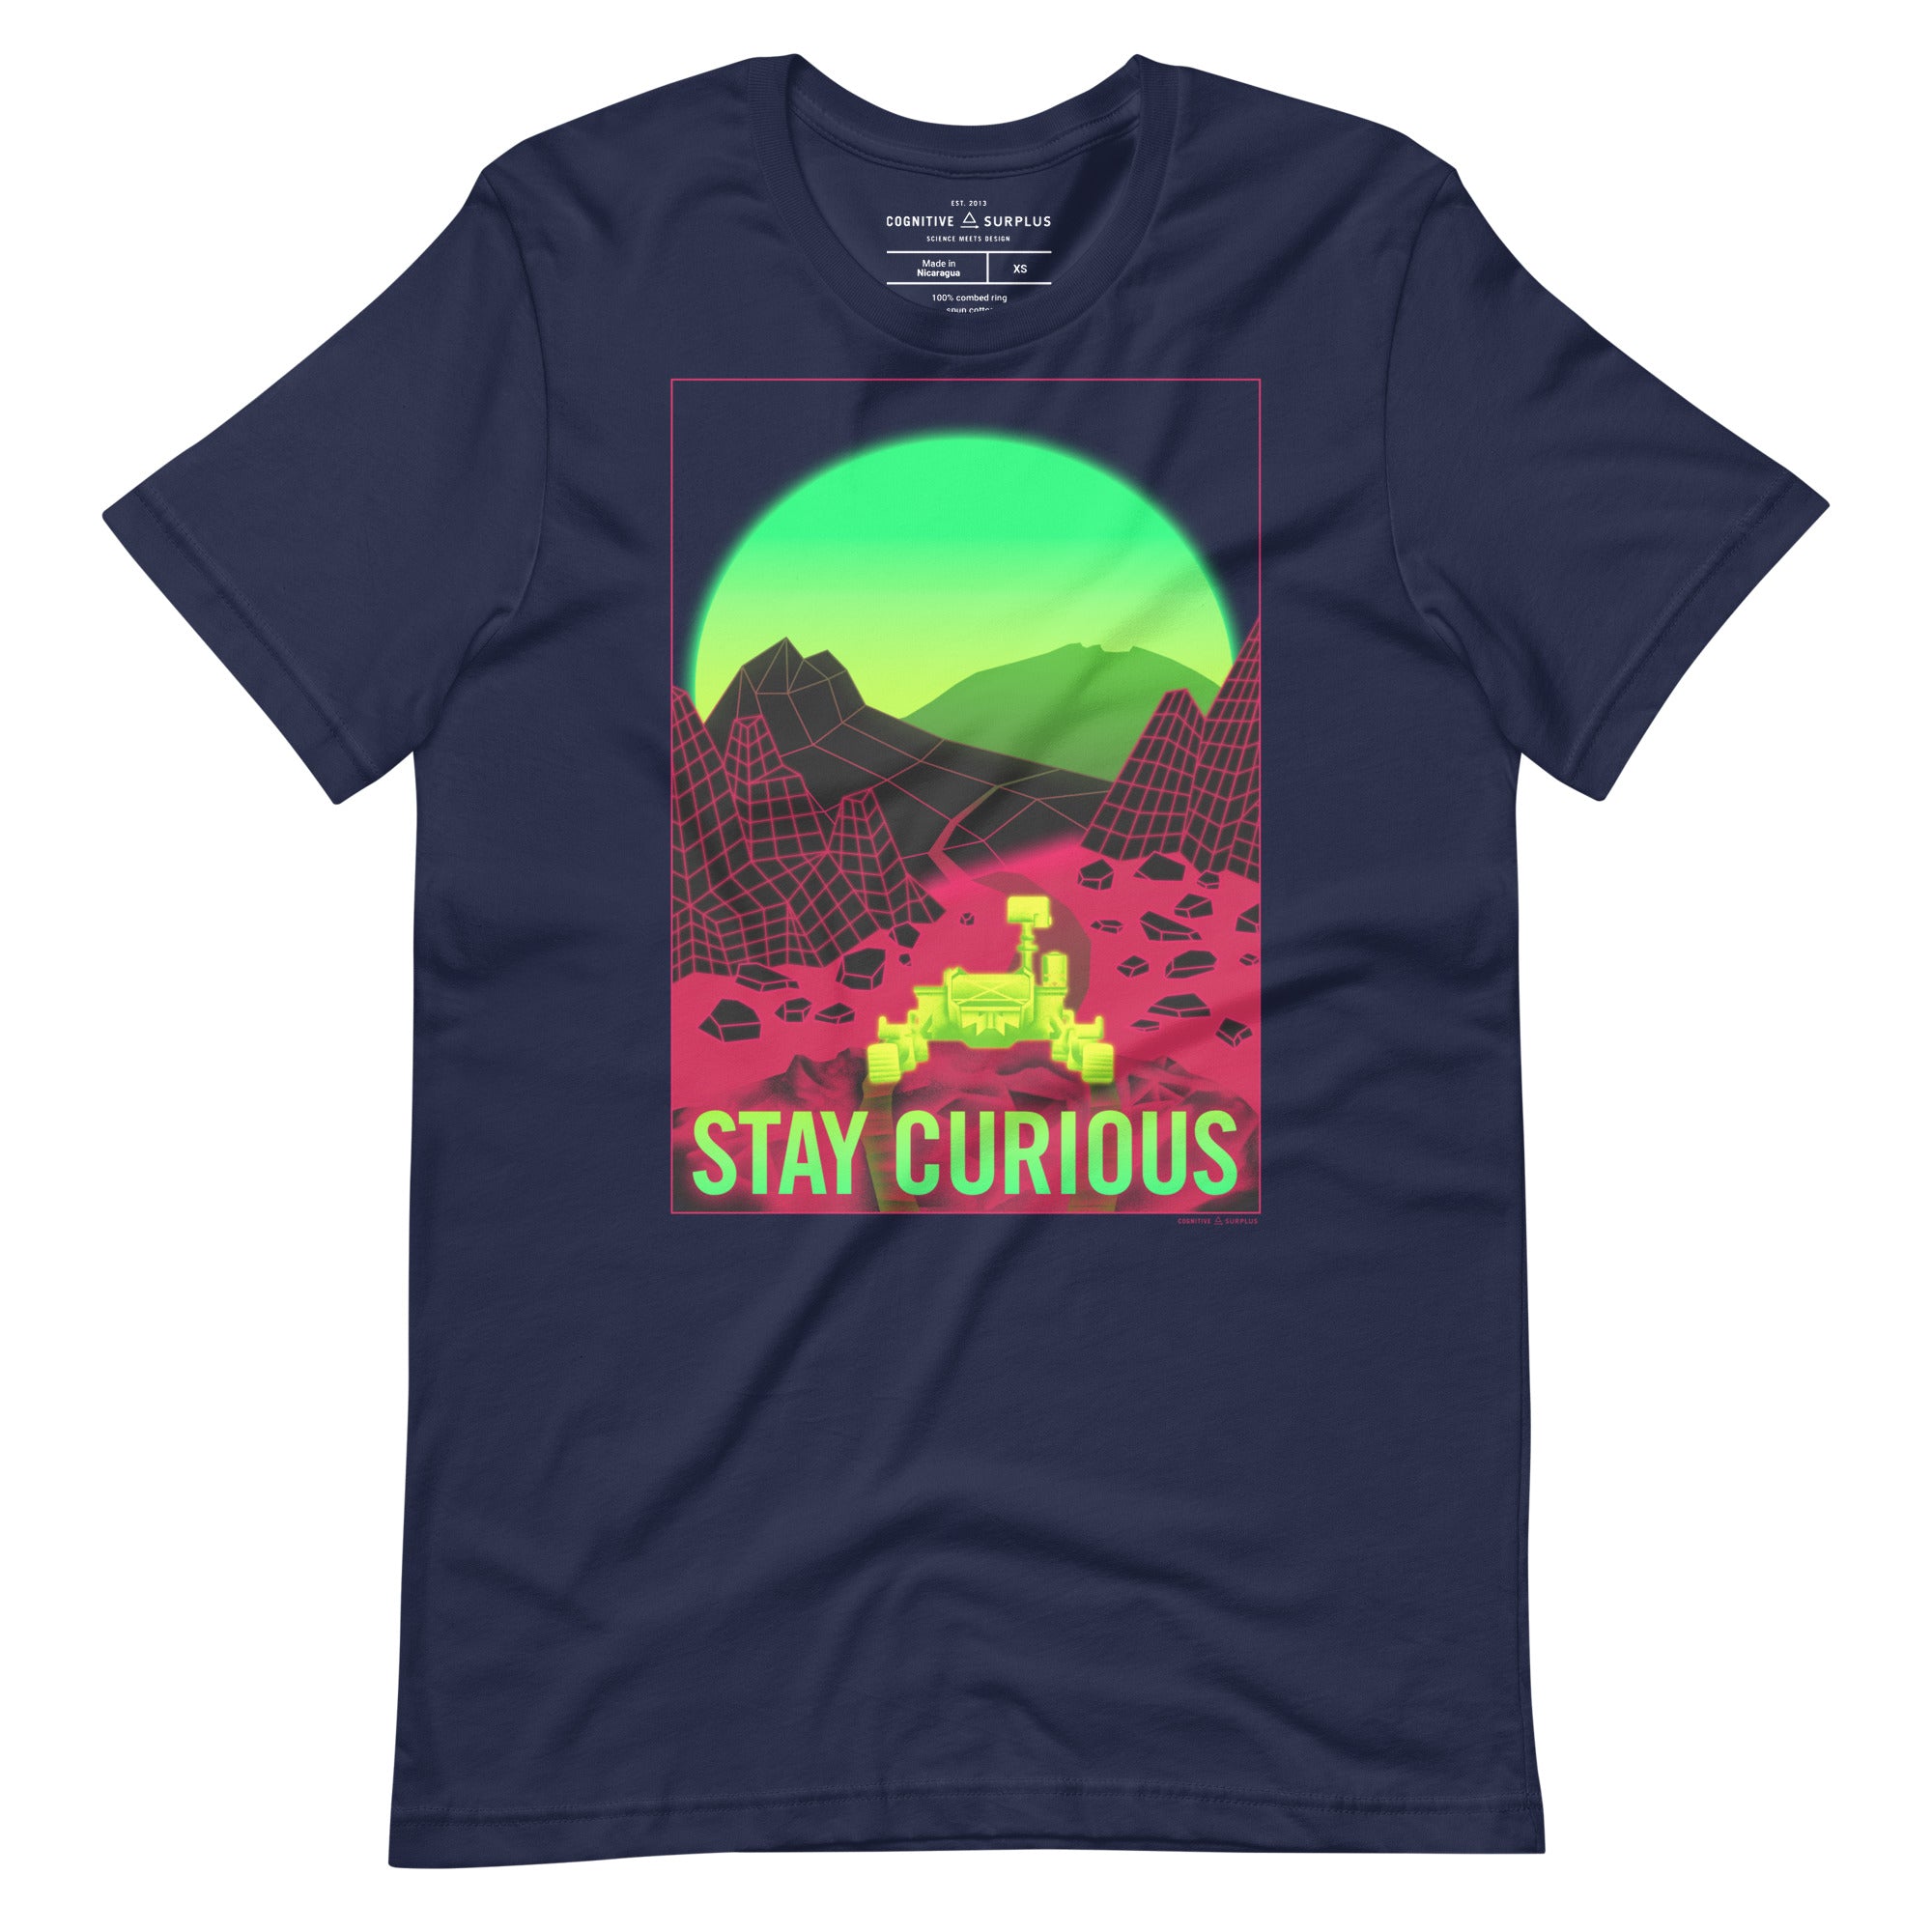 Stay Curious - Vaporwave Mars Rover Graphic Tee